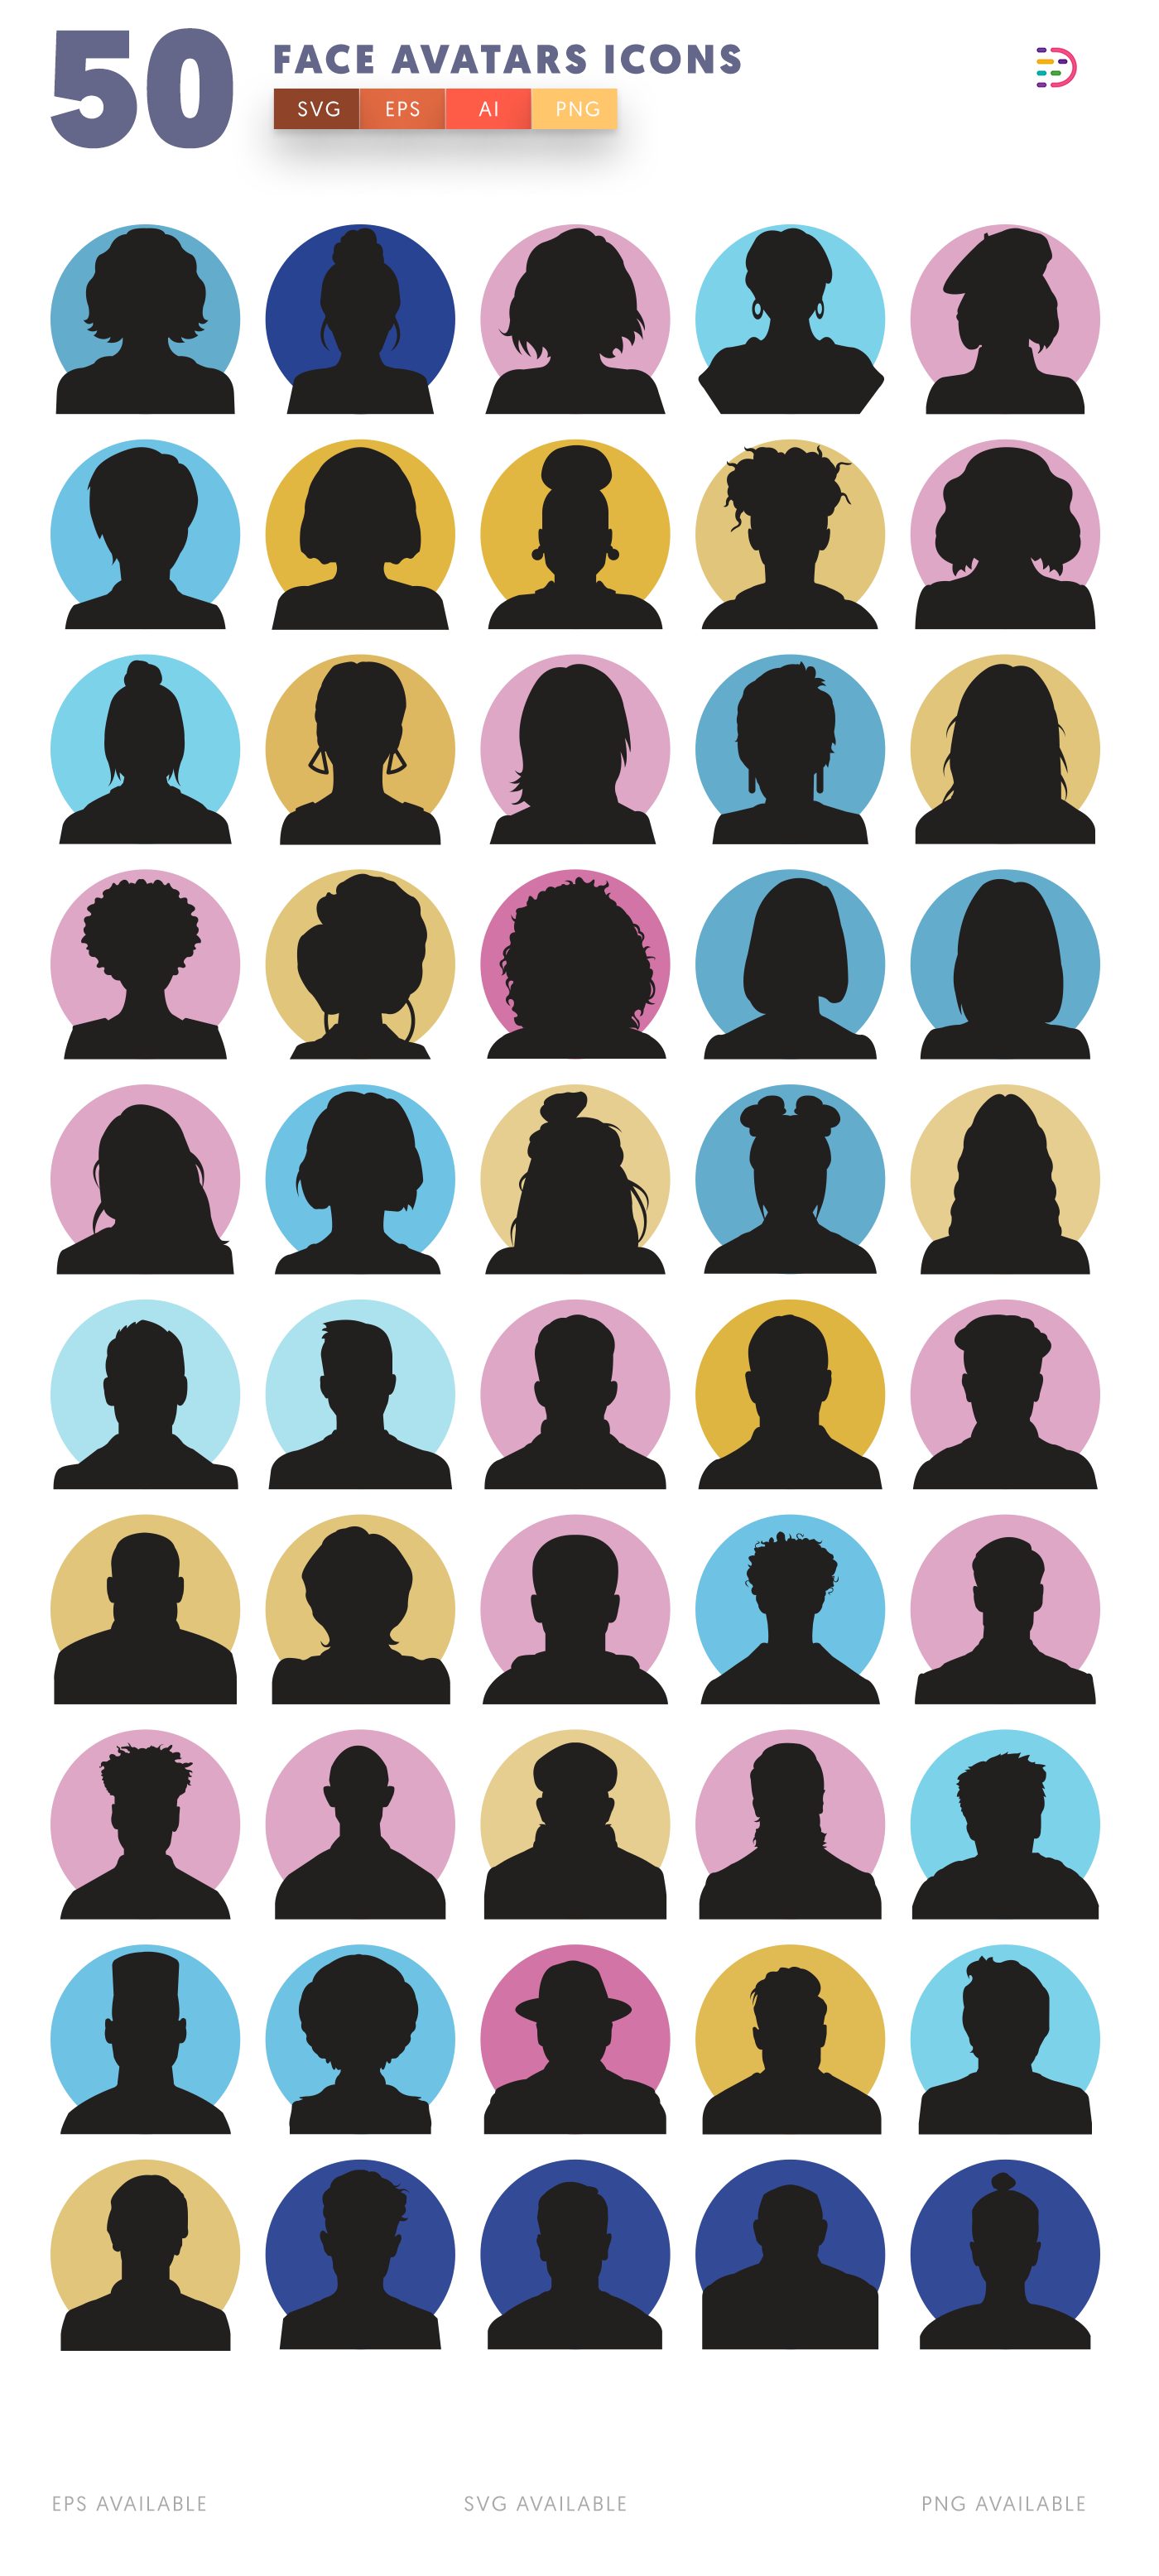 Face Avatars icon pack